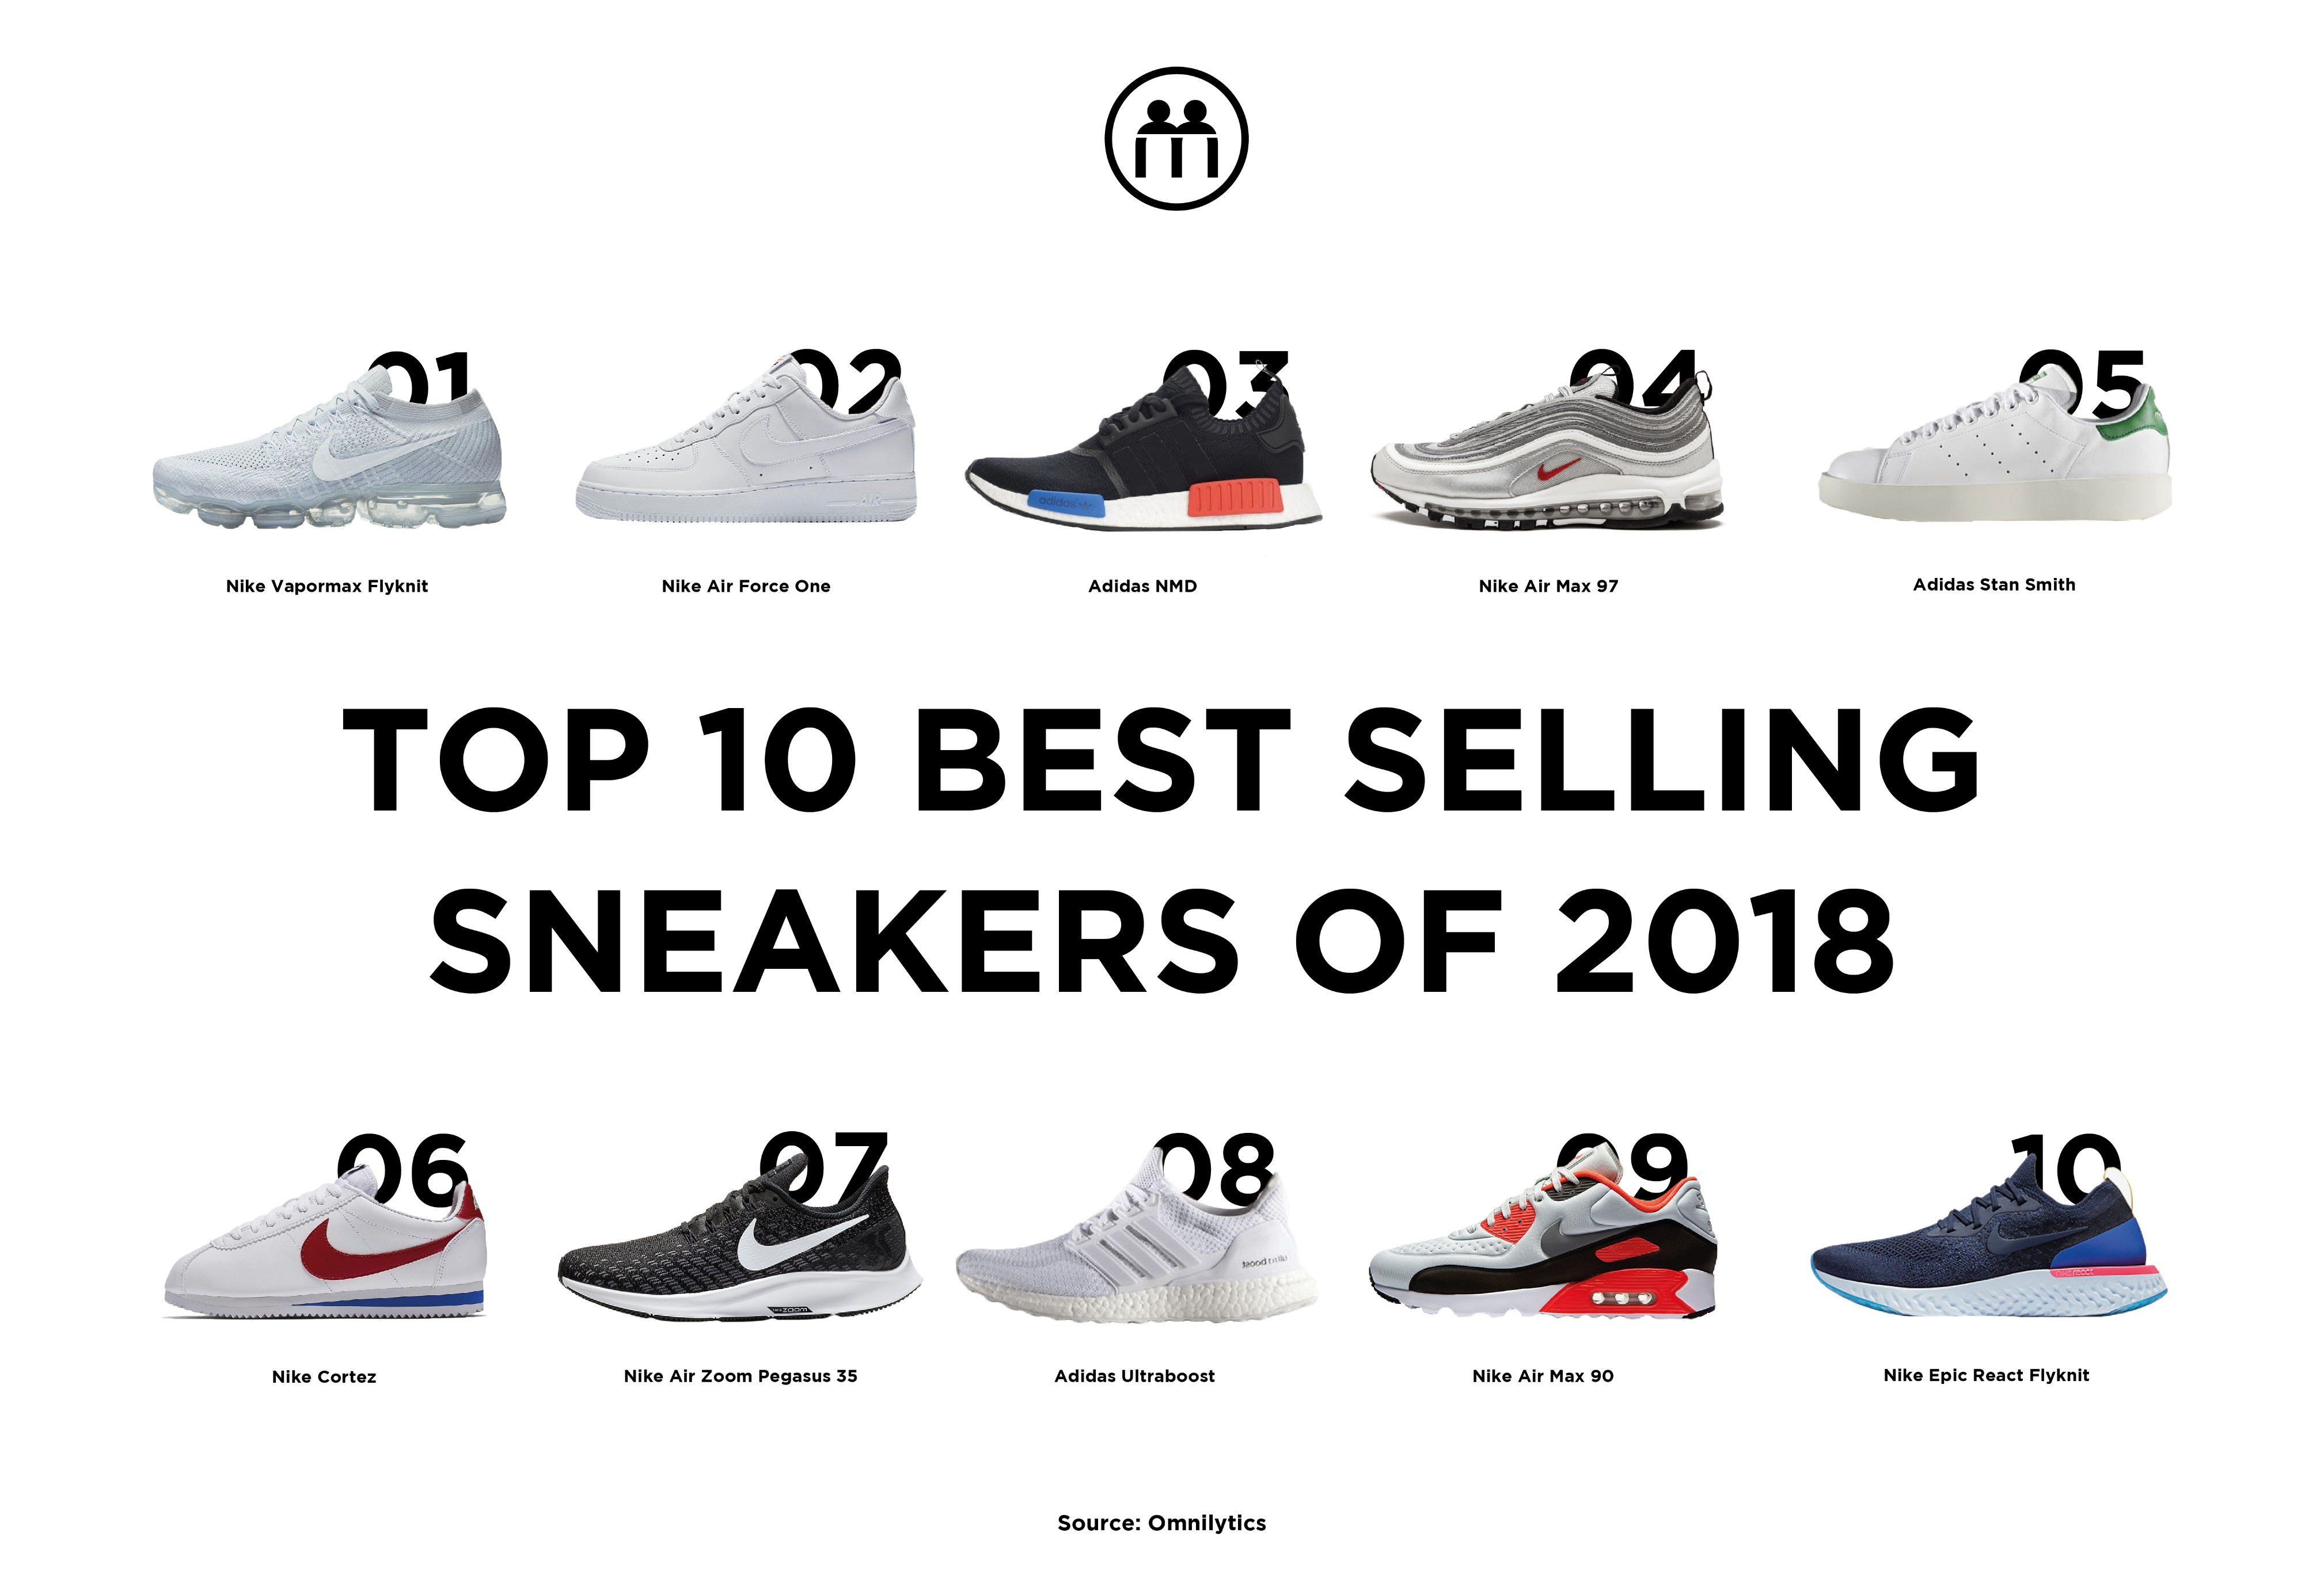 top 10 branded shoes company